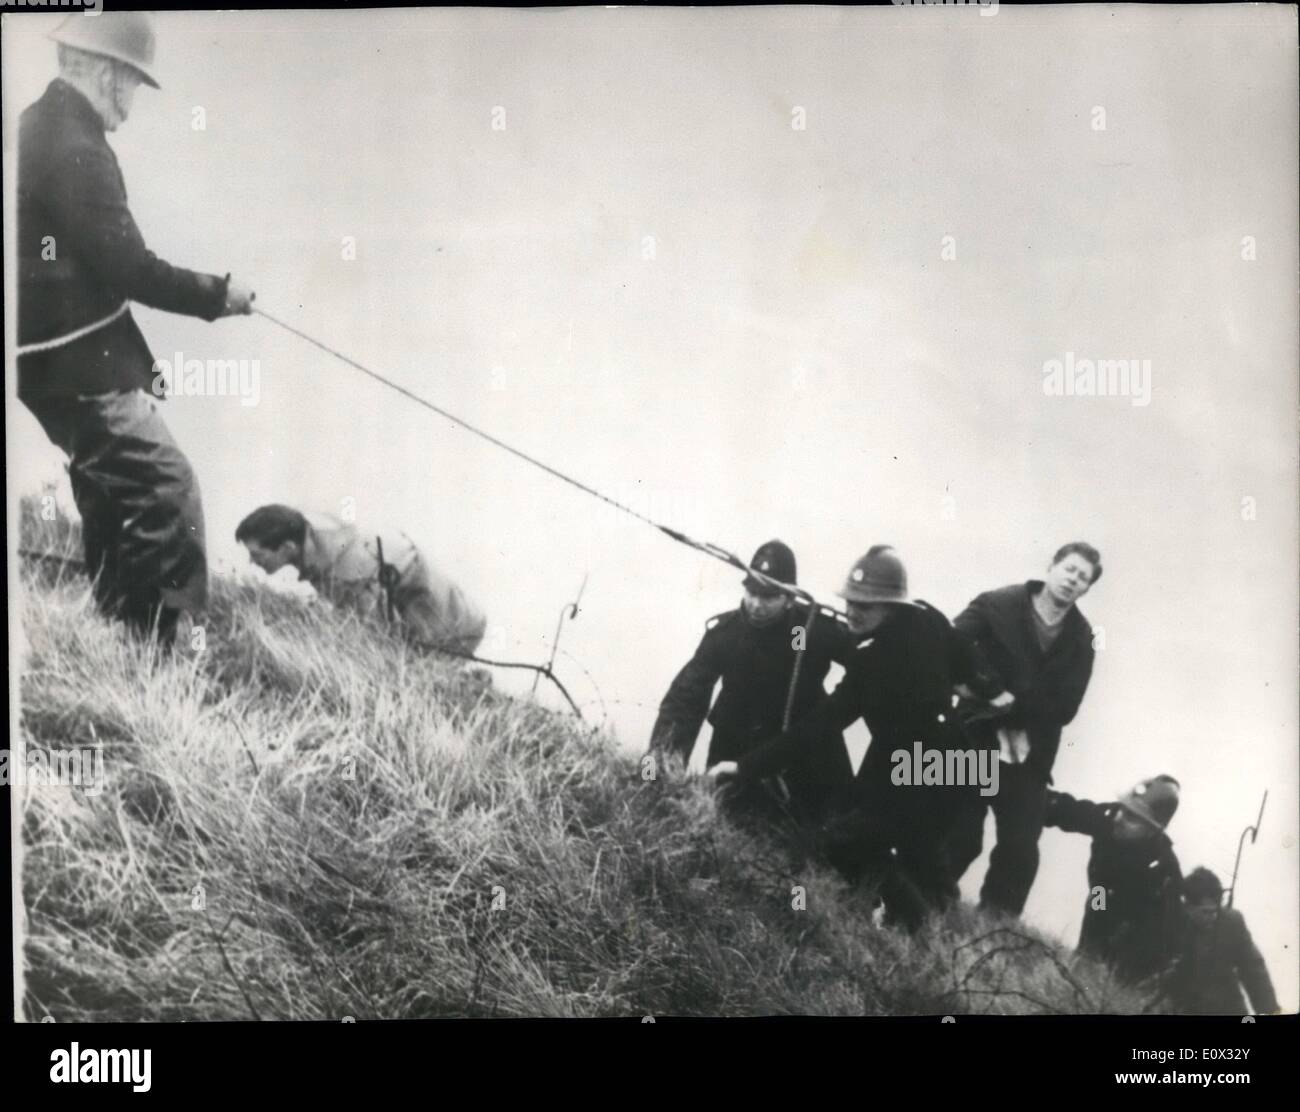 Jan. 01, 1965 - Runaway Borstal Boy trapped in Clift drama after threatening to jump 400-feet: A struggle on a cliff face ended Stock Photo